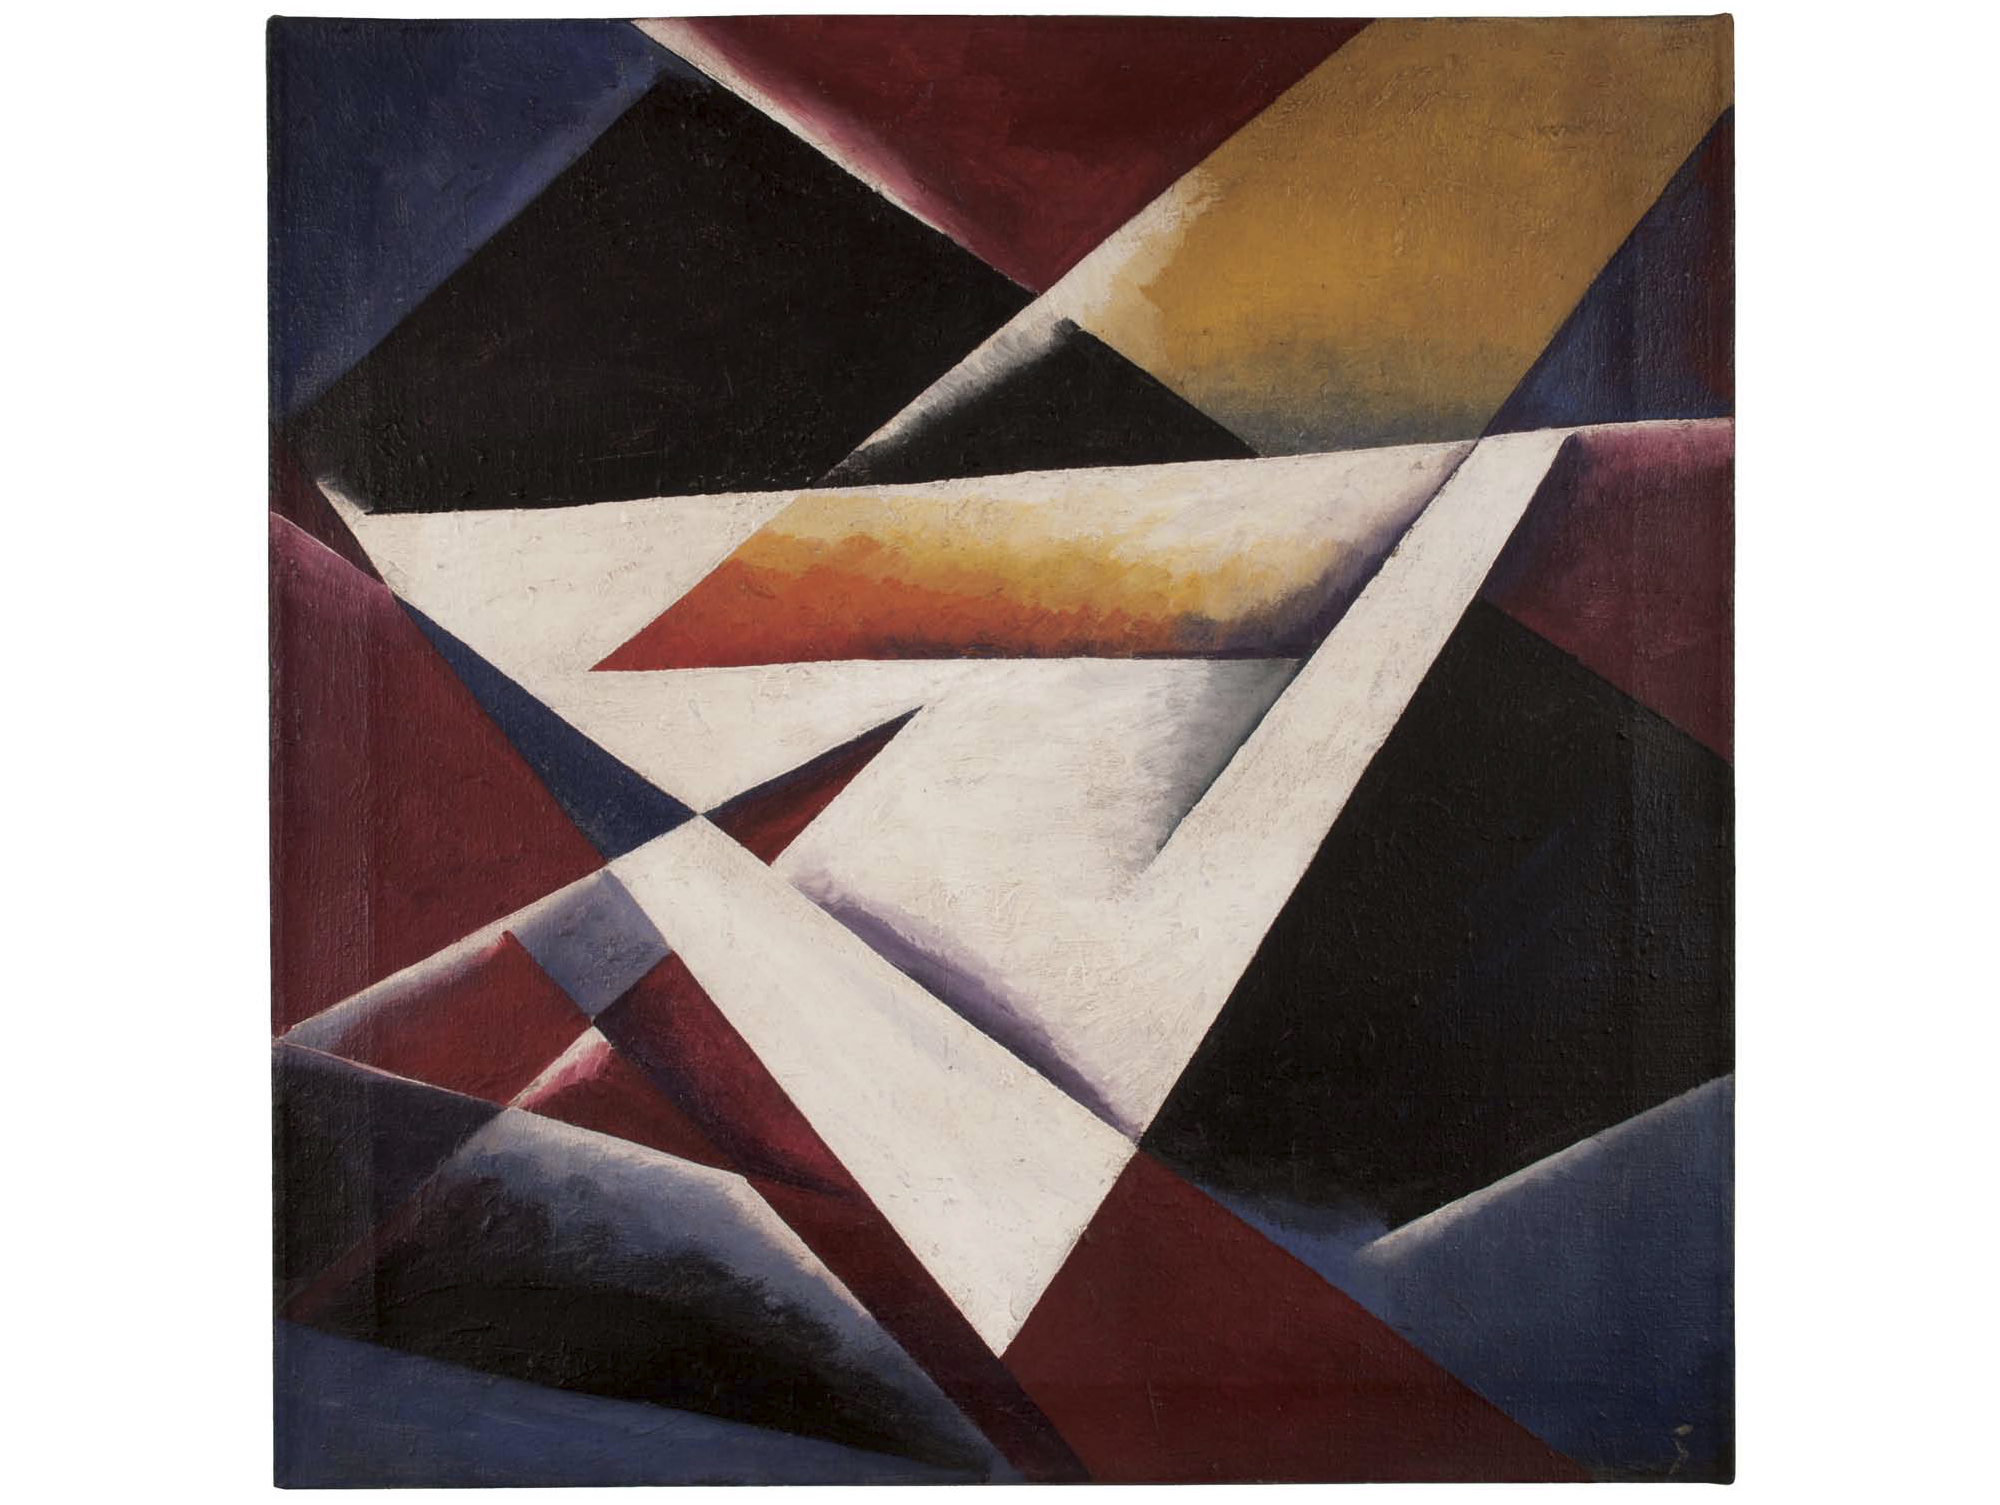   Unattributed. Unsigned.     In the style of Lyubov Popova.&nbsp;   Oil on canvas, 60 x 60 cm. 